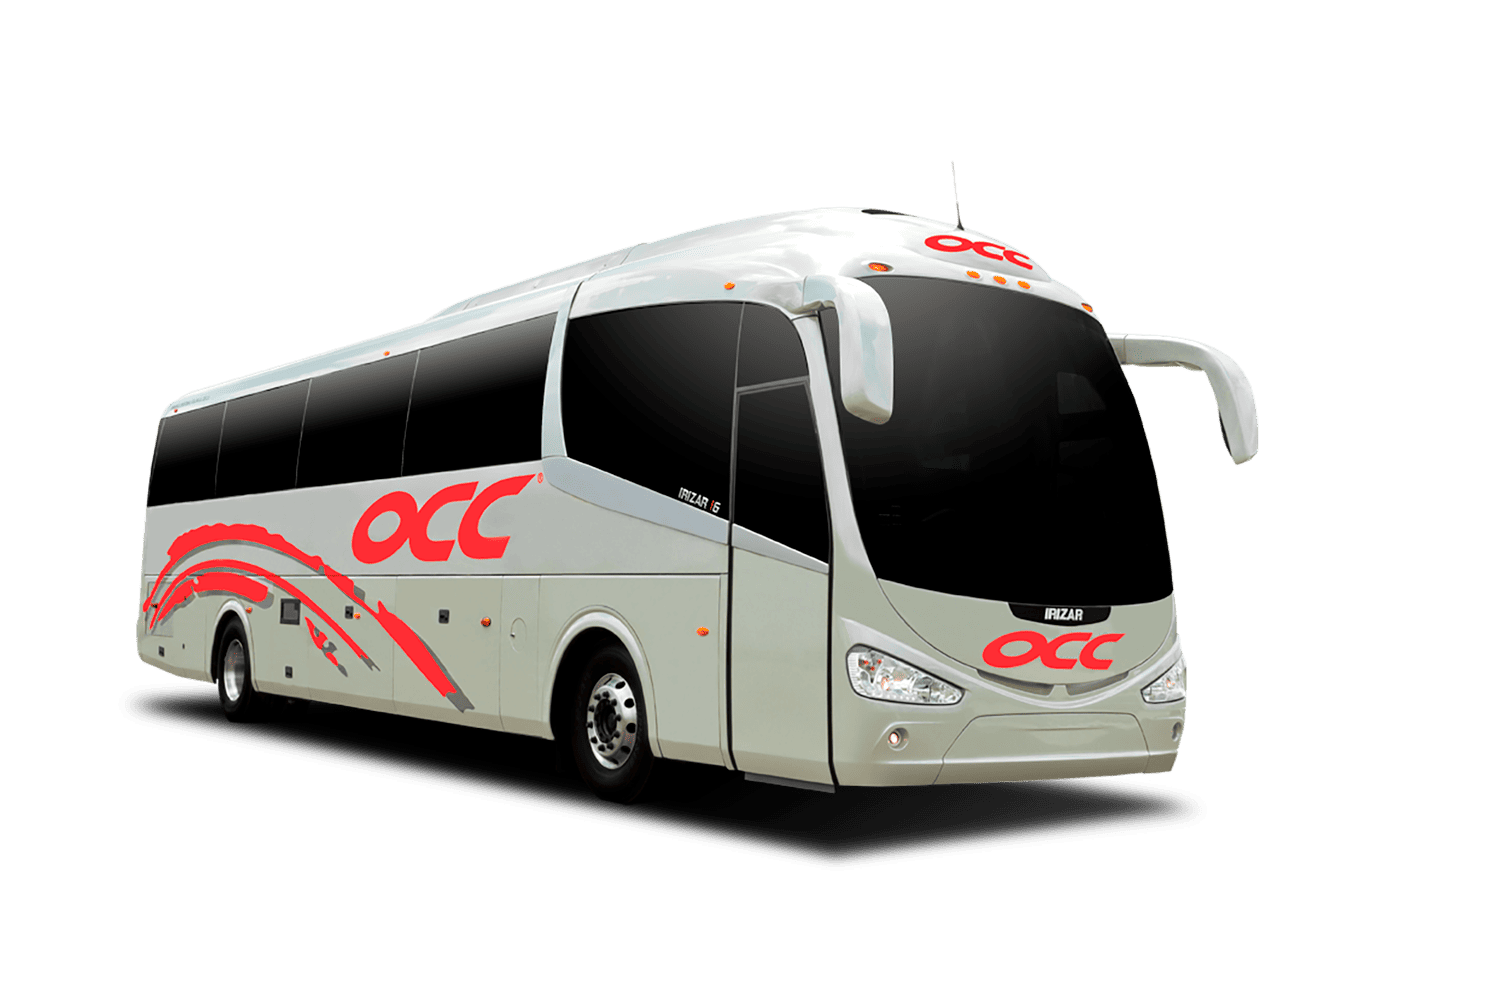 How To Get From Palenque To San Cristobal de las Casas By Bus - All Possible Ways, cheapest way from Palenque to San Cristobal de las Casas, Palenque to San Cristobal, Palenque to San Cristobal de las Casas, ado bus from Palenque to San Cristobal de las Casas, occ bus from Palenque to San Cristobal de las Casas, AU autobuses unidos from Palenque to San Cristobal de las Casas, shared van from Palenque to San Cristobal de las Casas, Colectivo from Palenque to San Cristobal de las Casas, Uber from Palenque to San Cristobal de las Casas, taxi from Palenque to San Cristobal de las Casas